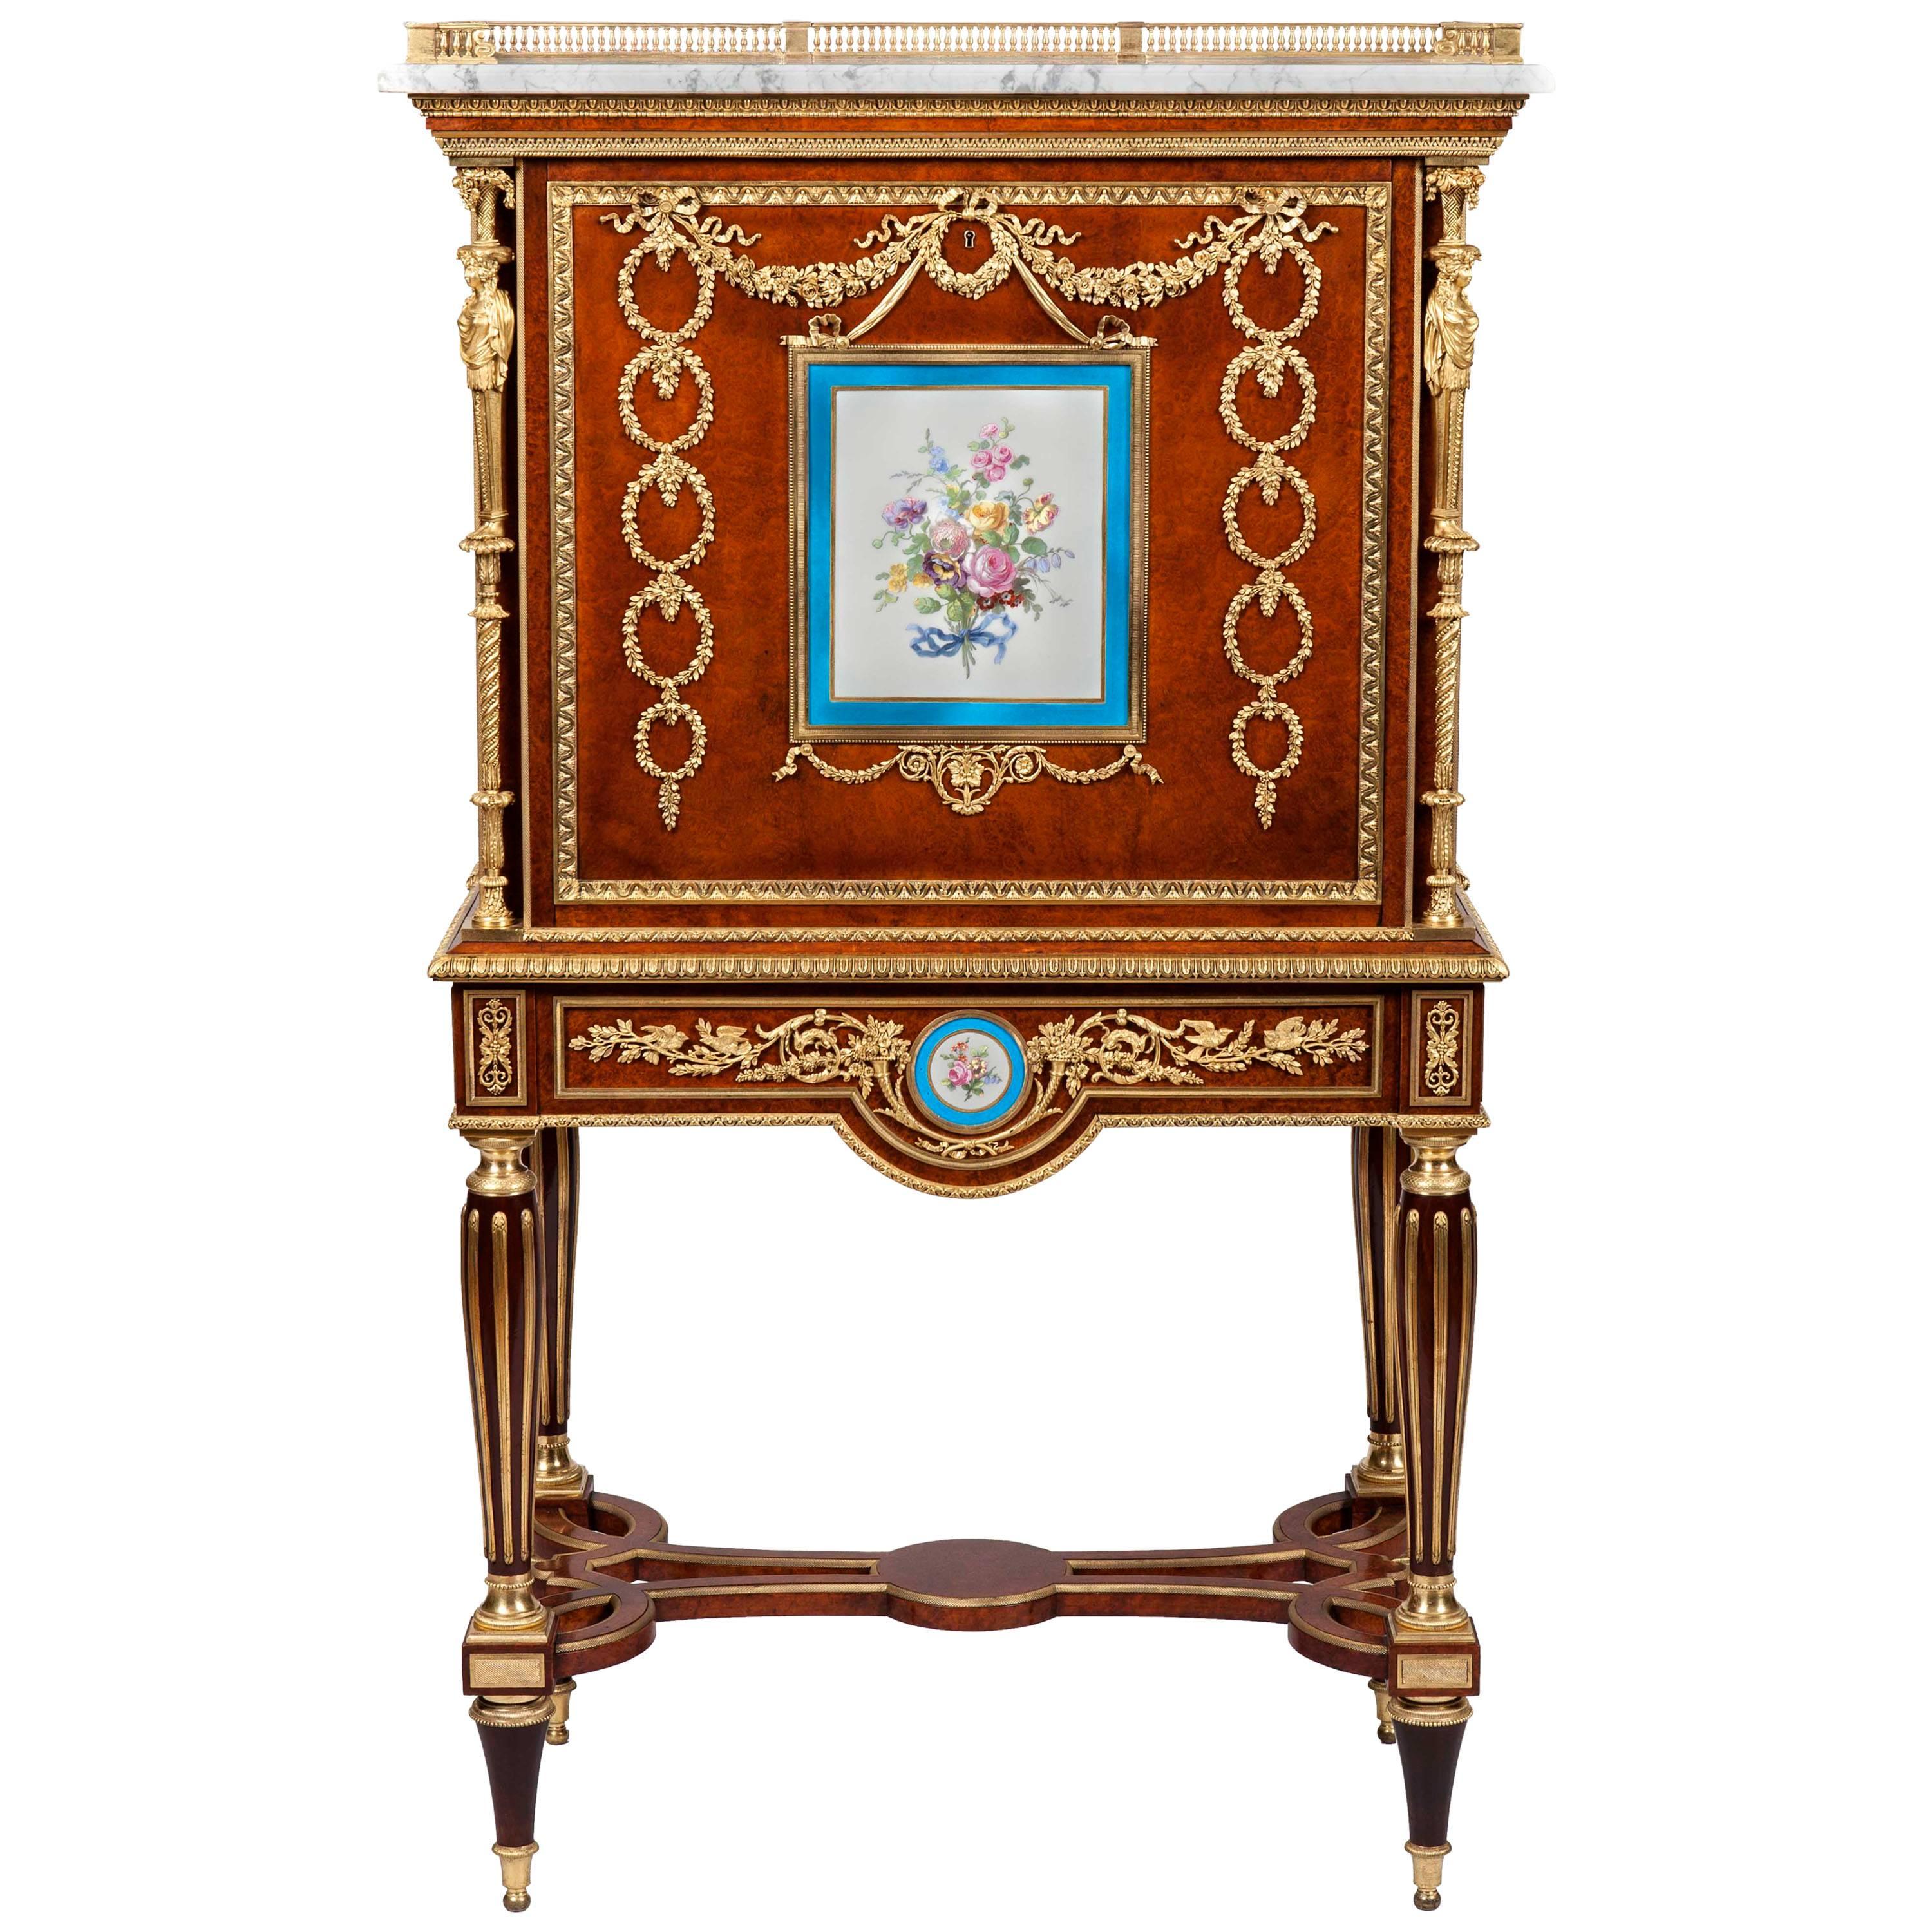 19th Century French Secretaire with Ormolu and Sevres Porcelain Plaques